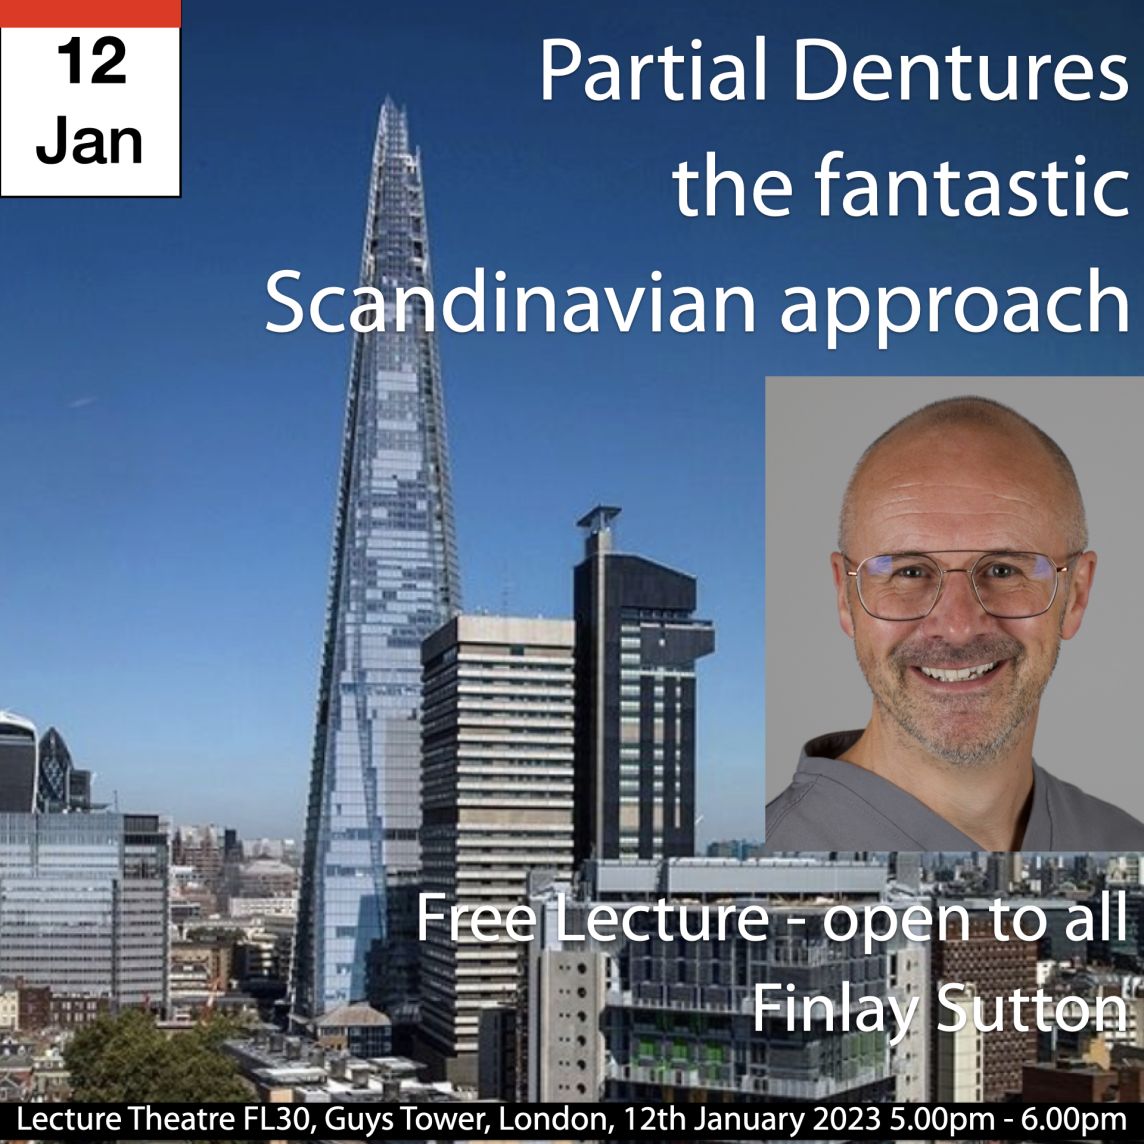 ***Free London Lecture*** Evening lecture on Thursday 12th January 2023 for King's College London Dental Society